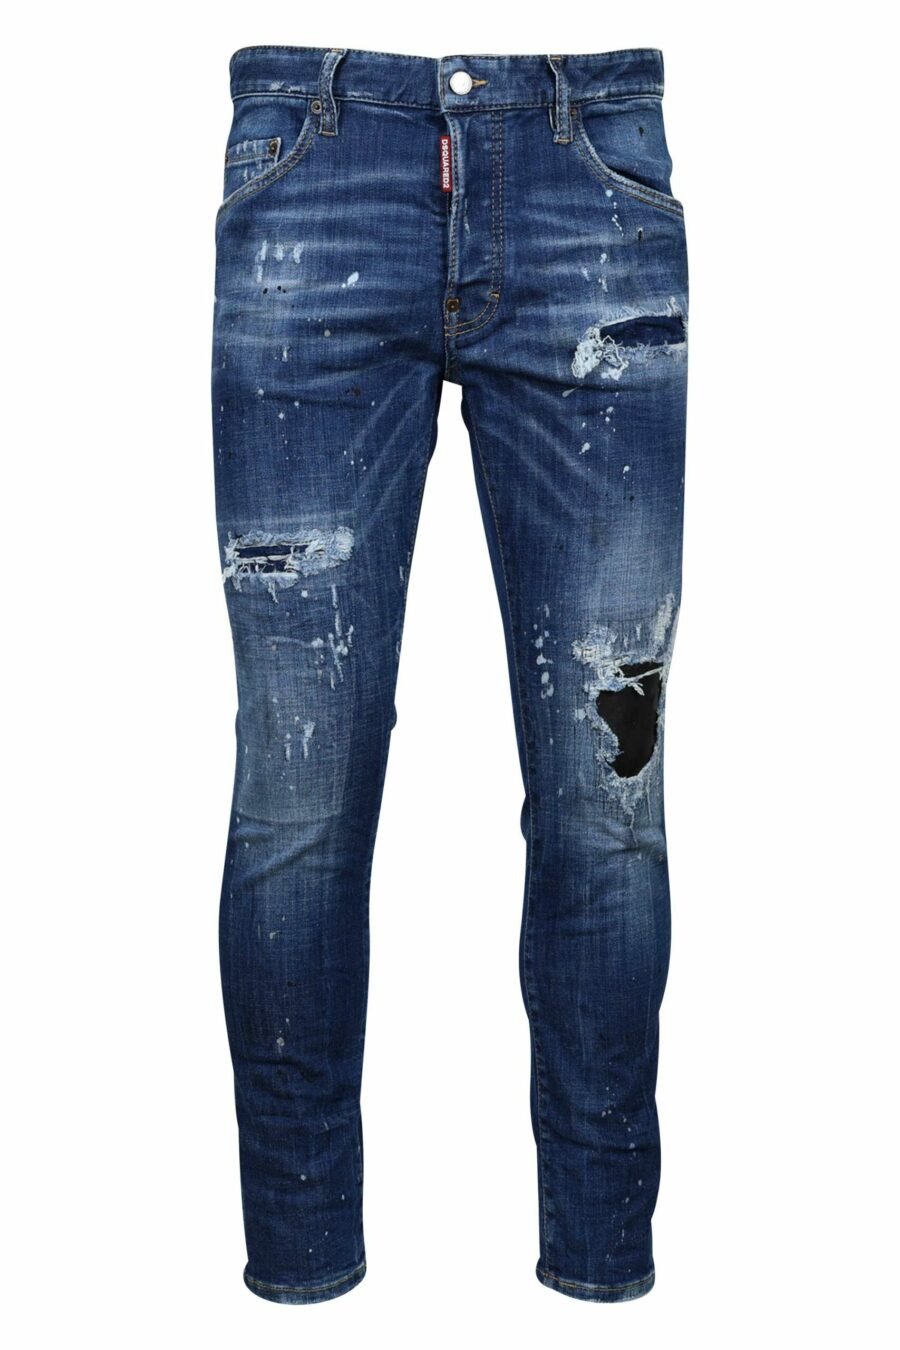 Blue "skater jean" jeans with rips and frayed - 8054148124687 1 scaled